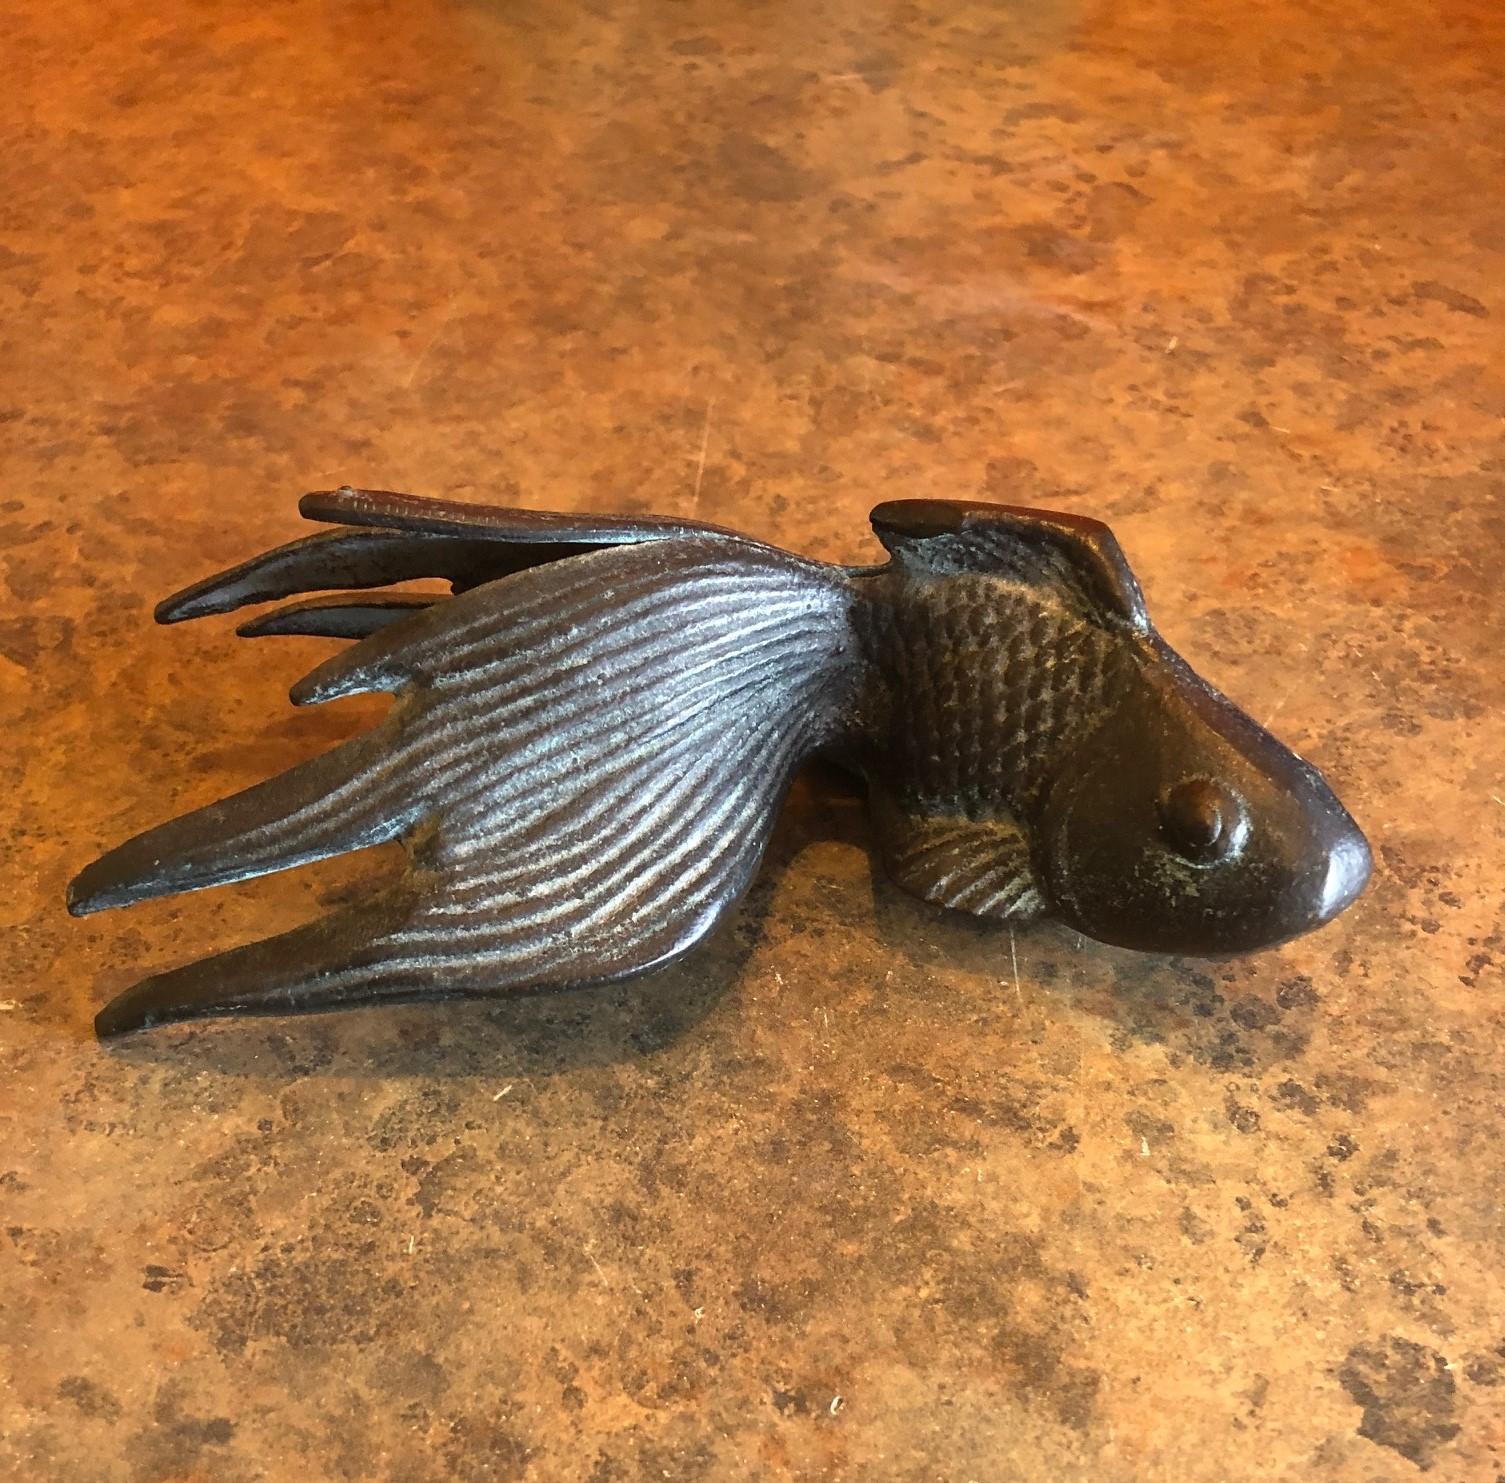 Small patinated bronze koi fish sculpture, circa 1970s. The piece has a great look and patinated finish and would make a great paperweight or decorative piece.